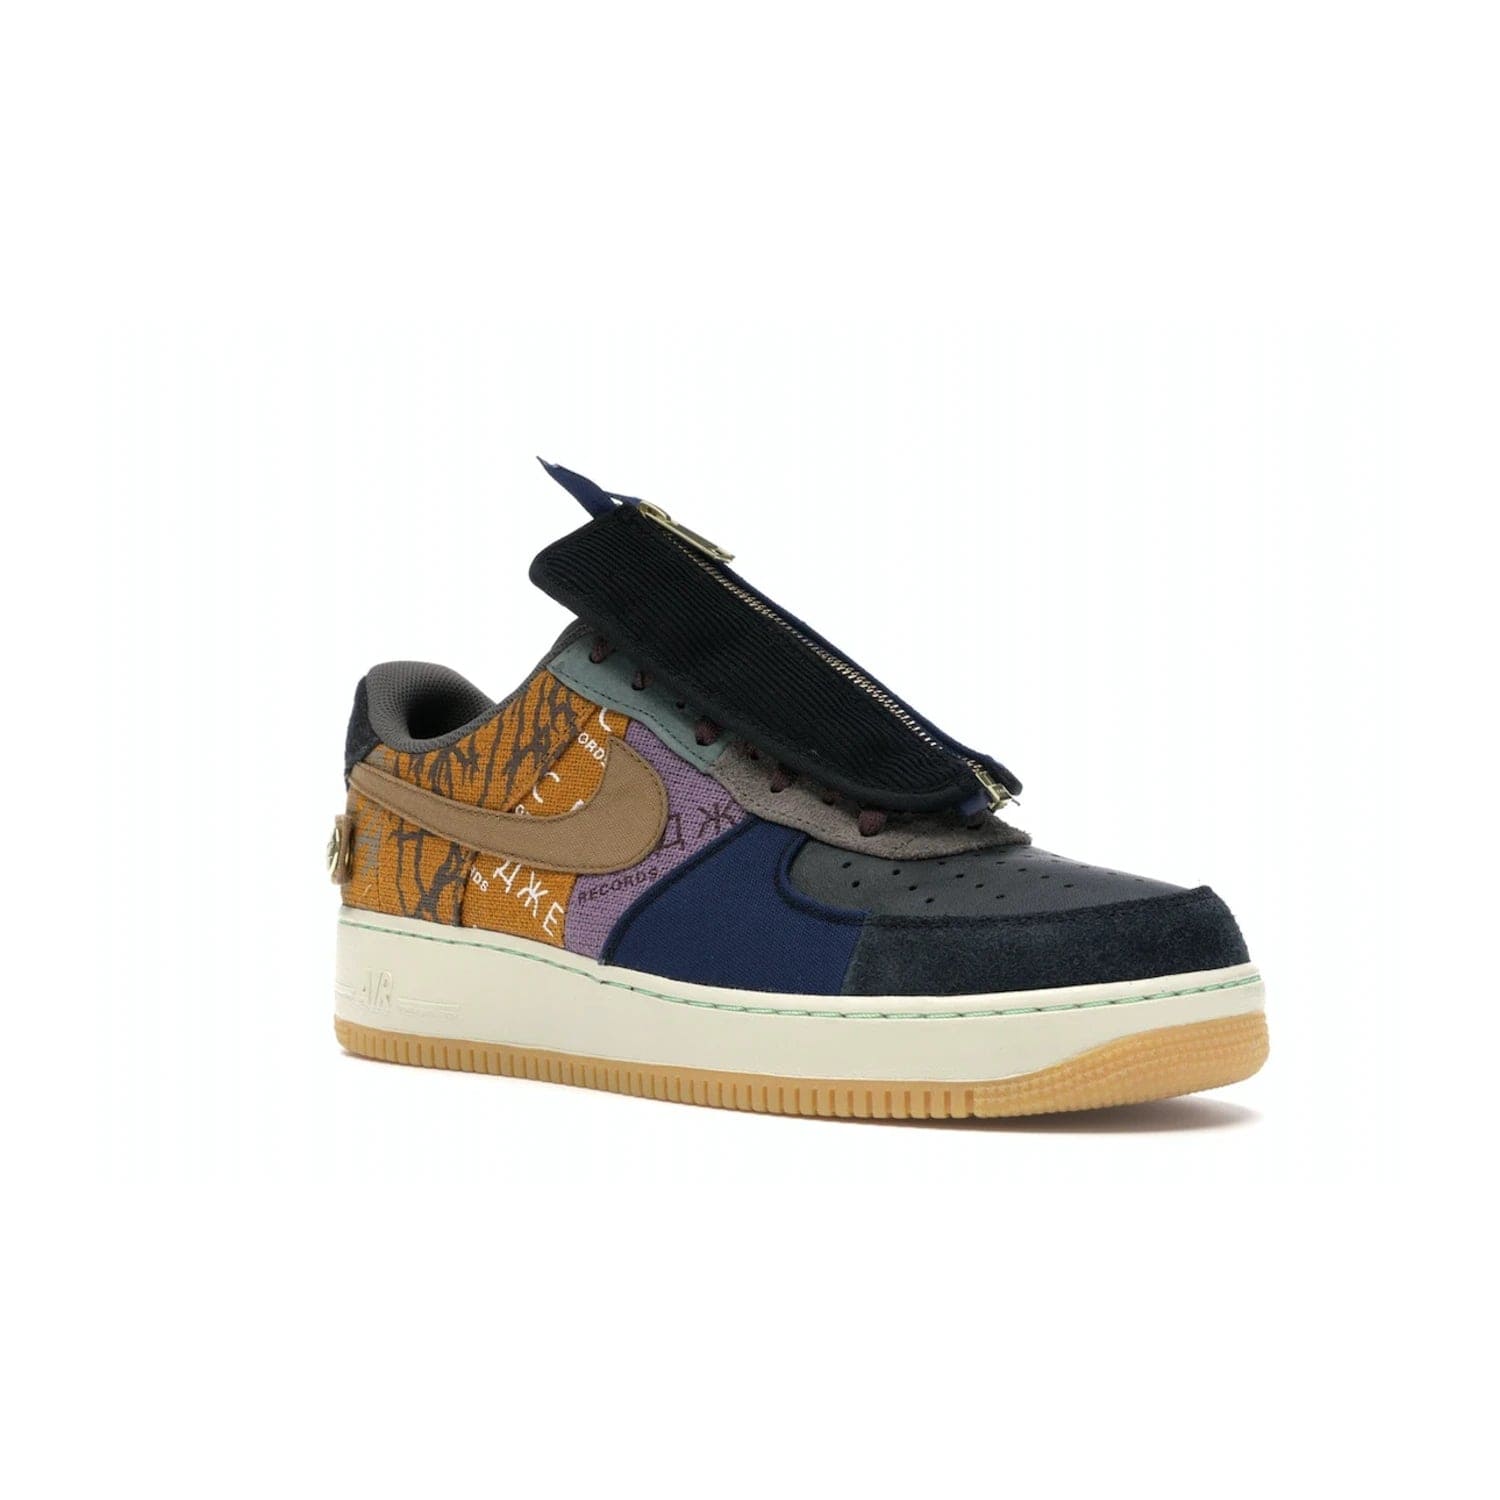 Nike Air Force 1 Low Travis Scott Cactus Jack - Image 5 - Only at www.BallersClubKickz.com - The Nike Air Force 1 Low Travis Scott Cactus Jack features a unique, multi-colored patchwork upper with muted bronze and fossil accents. Includes detachable lace cover, brass zipper, and Cactus Jack insignias. A sail midsole, gum rubber outsole complete the eye-catching design. Perfect for comfort and style with unexpected touches of detail.